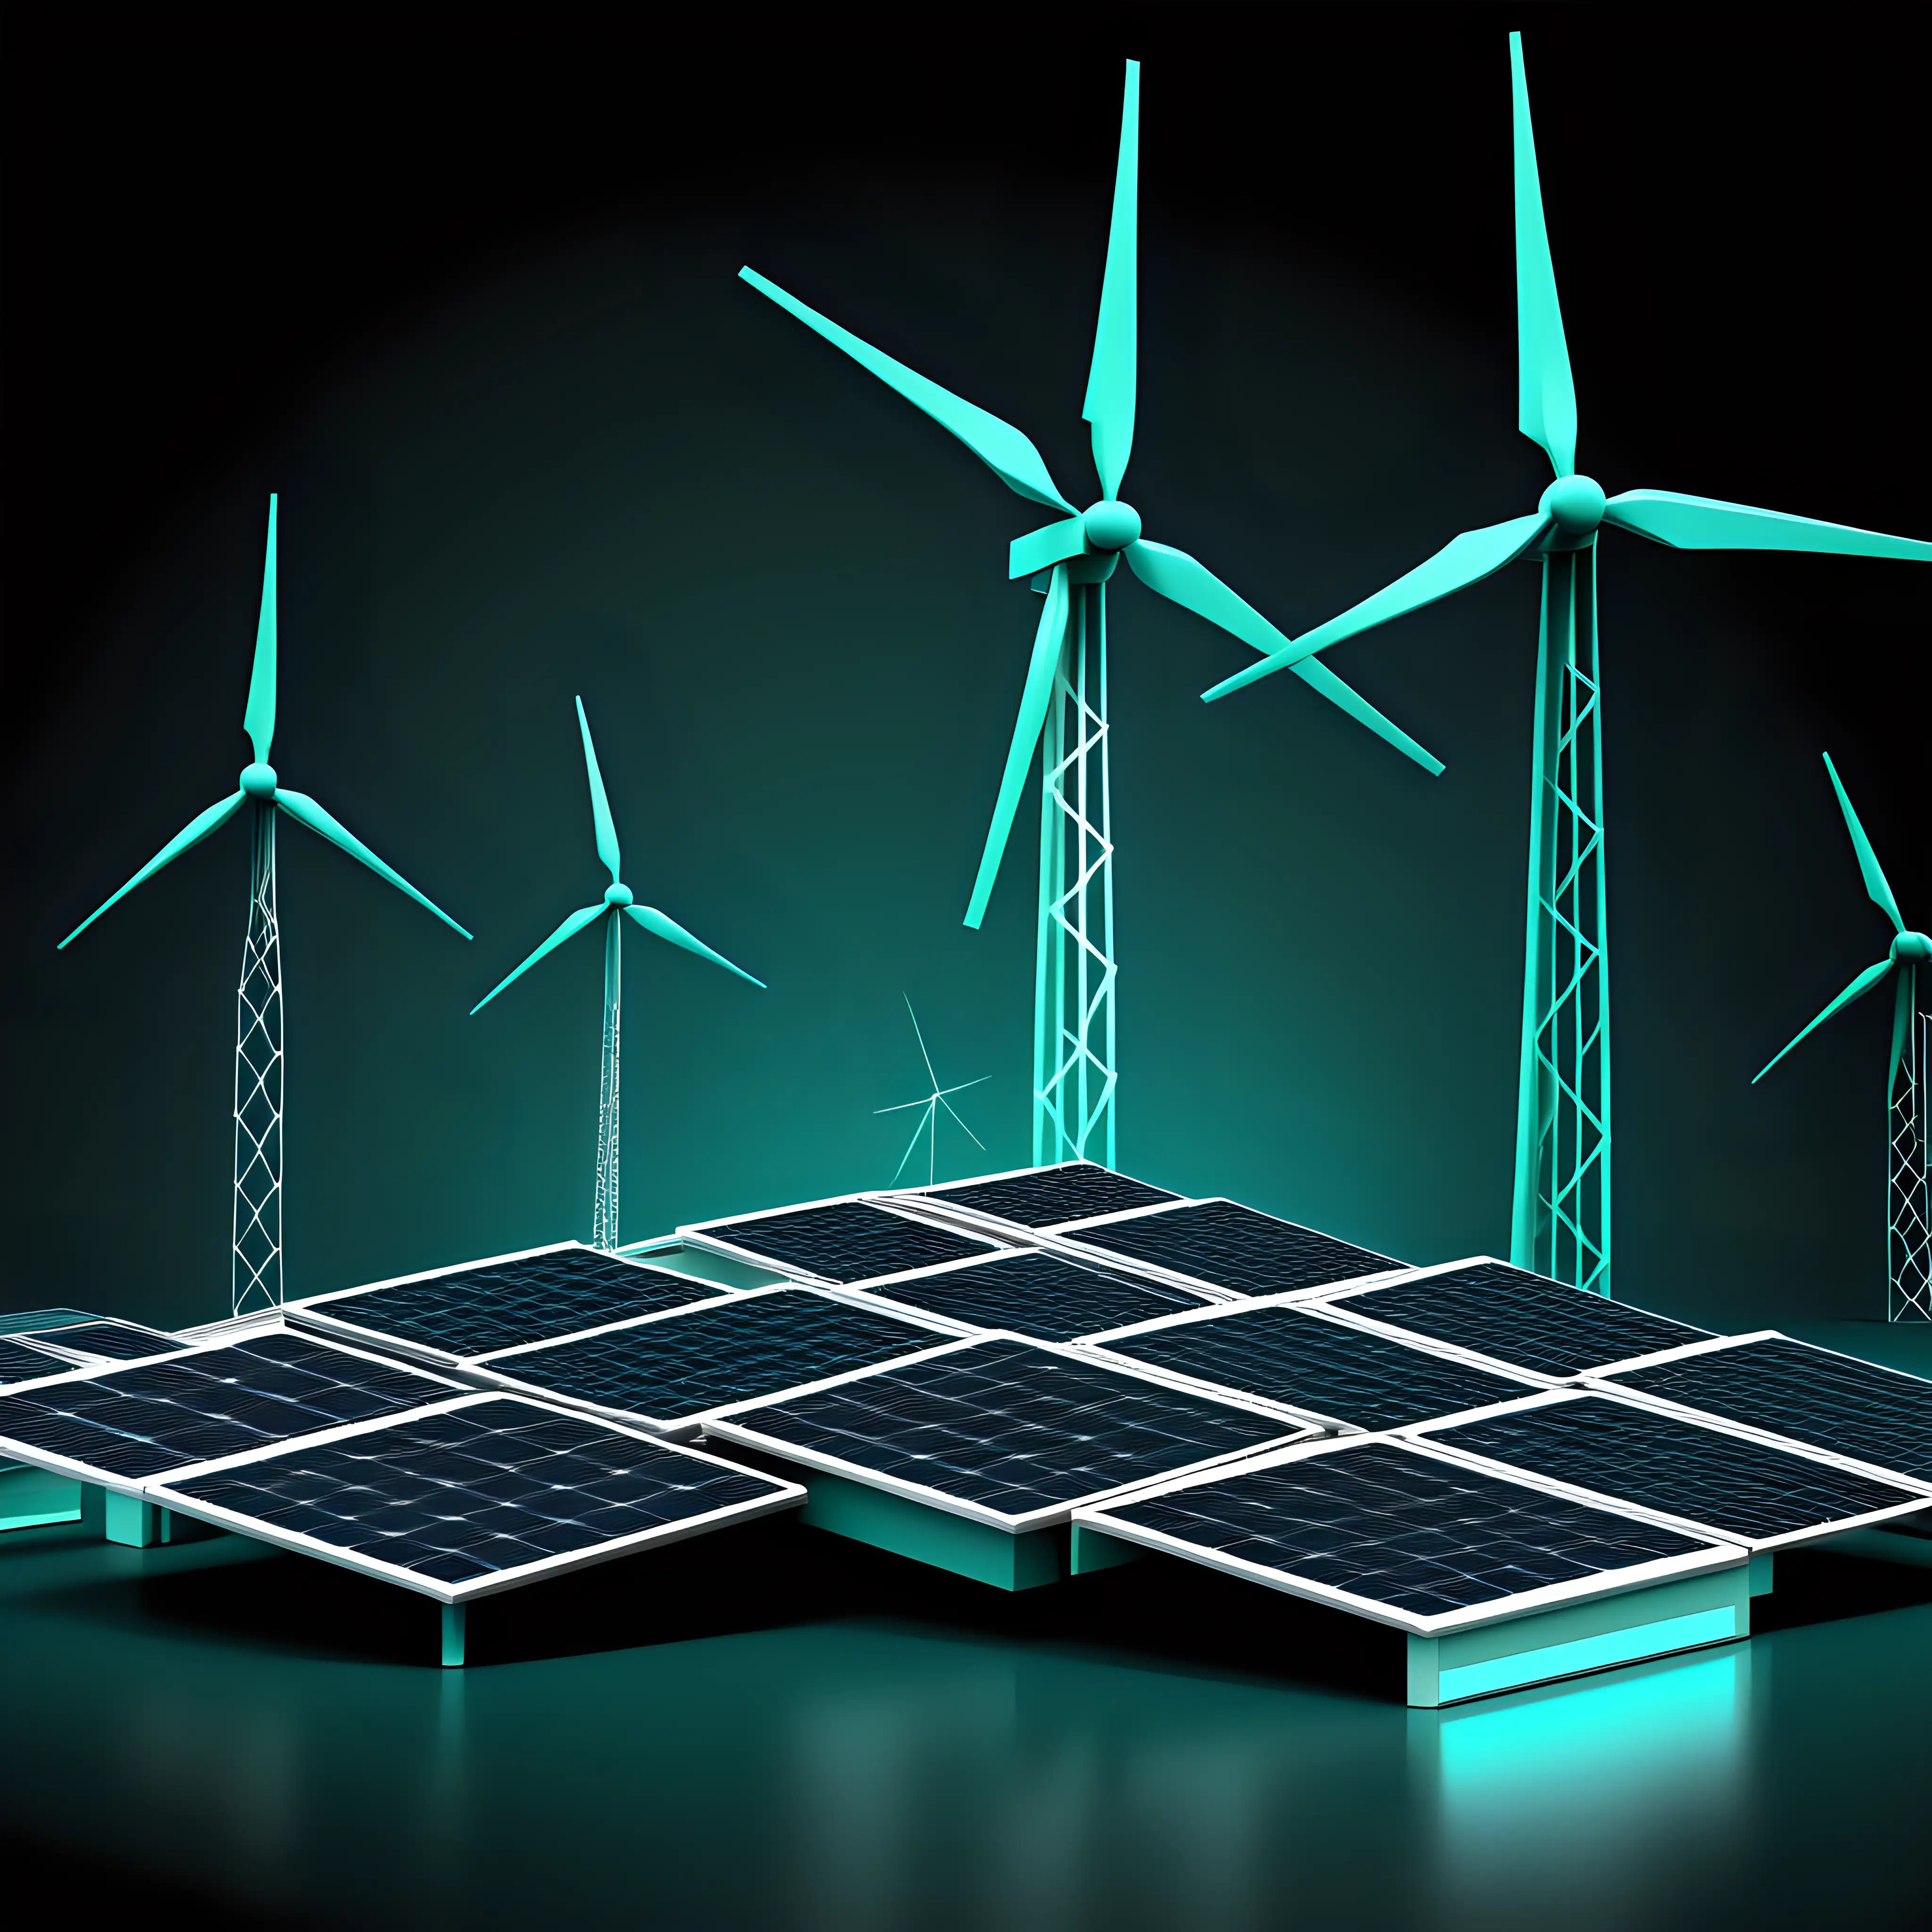 Teal Renewable Energy Website Section on Dark Background with Blockchain Concept